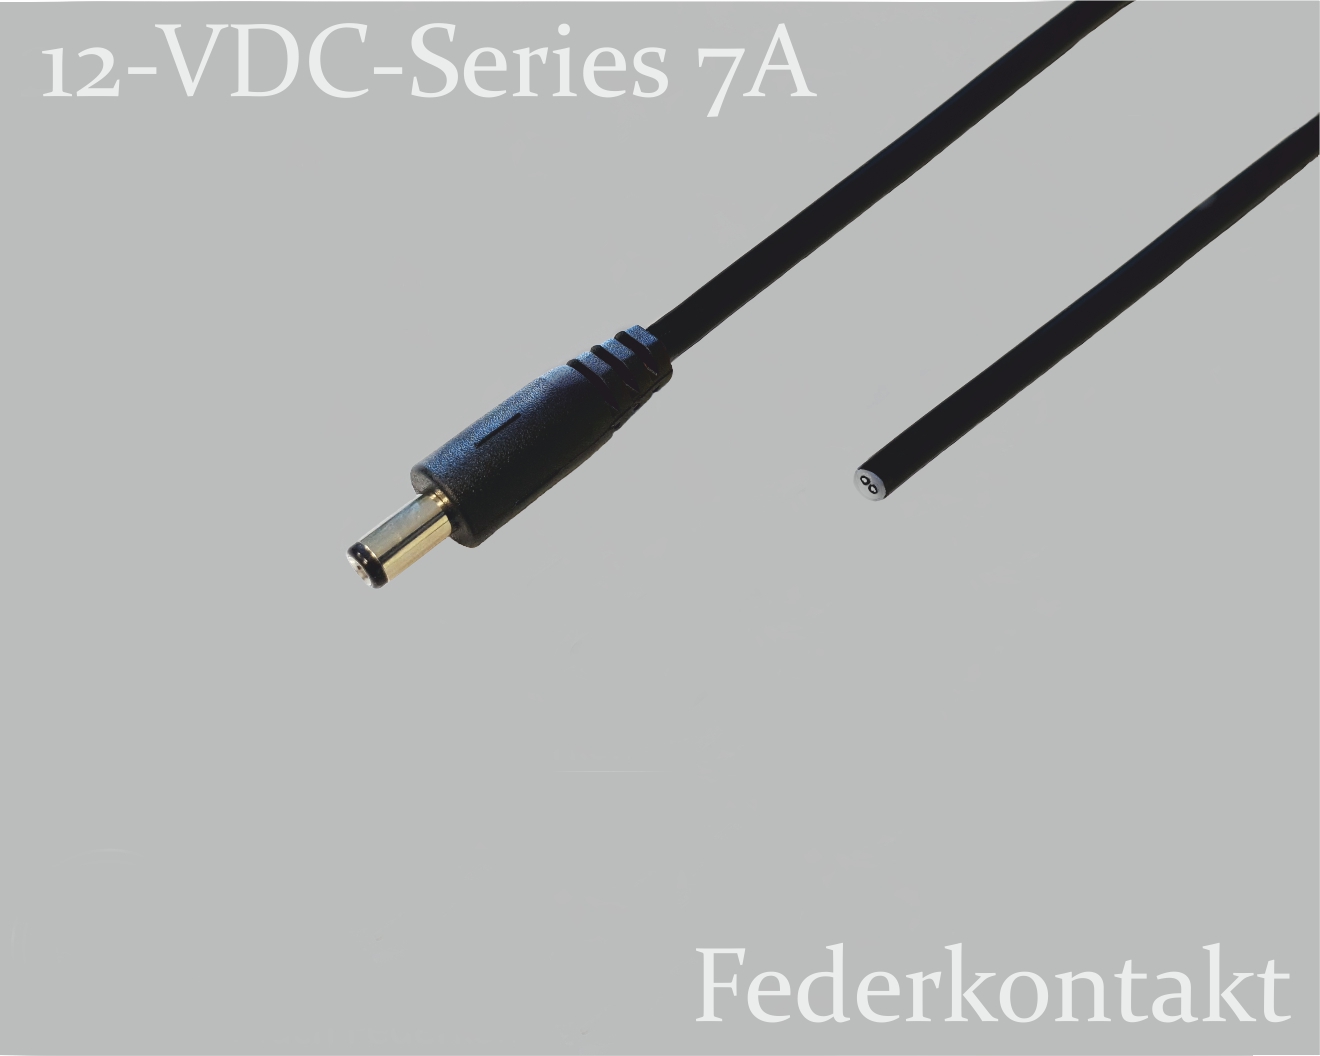 12-VDC-Series DC connection cable, DC plug with spring contact 1.7x4mm to open end, round cable 2x0.5mm², black, approx. 2m, straight cutted